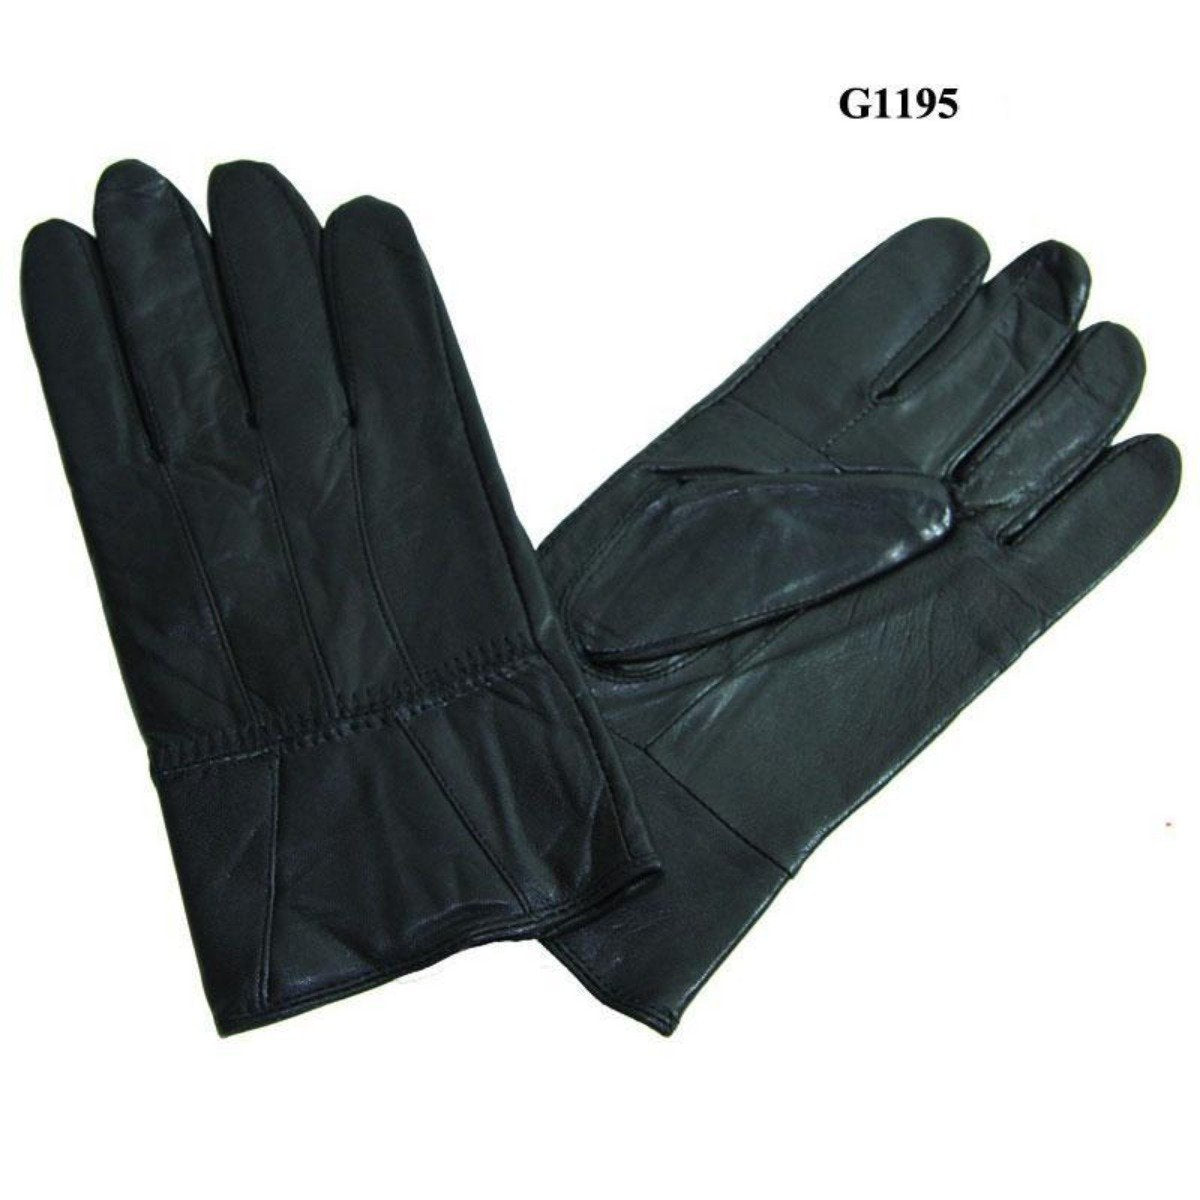 Genuine Leather Gloves - 12Pc Set -SMALL